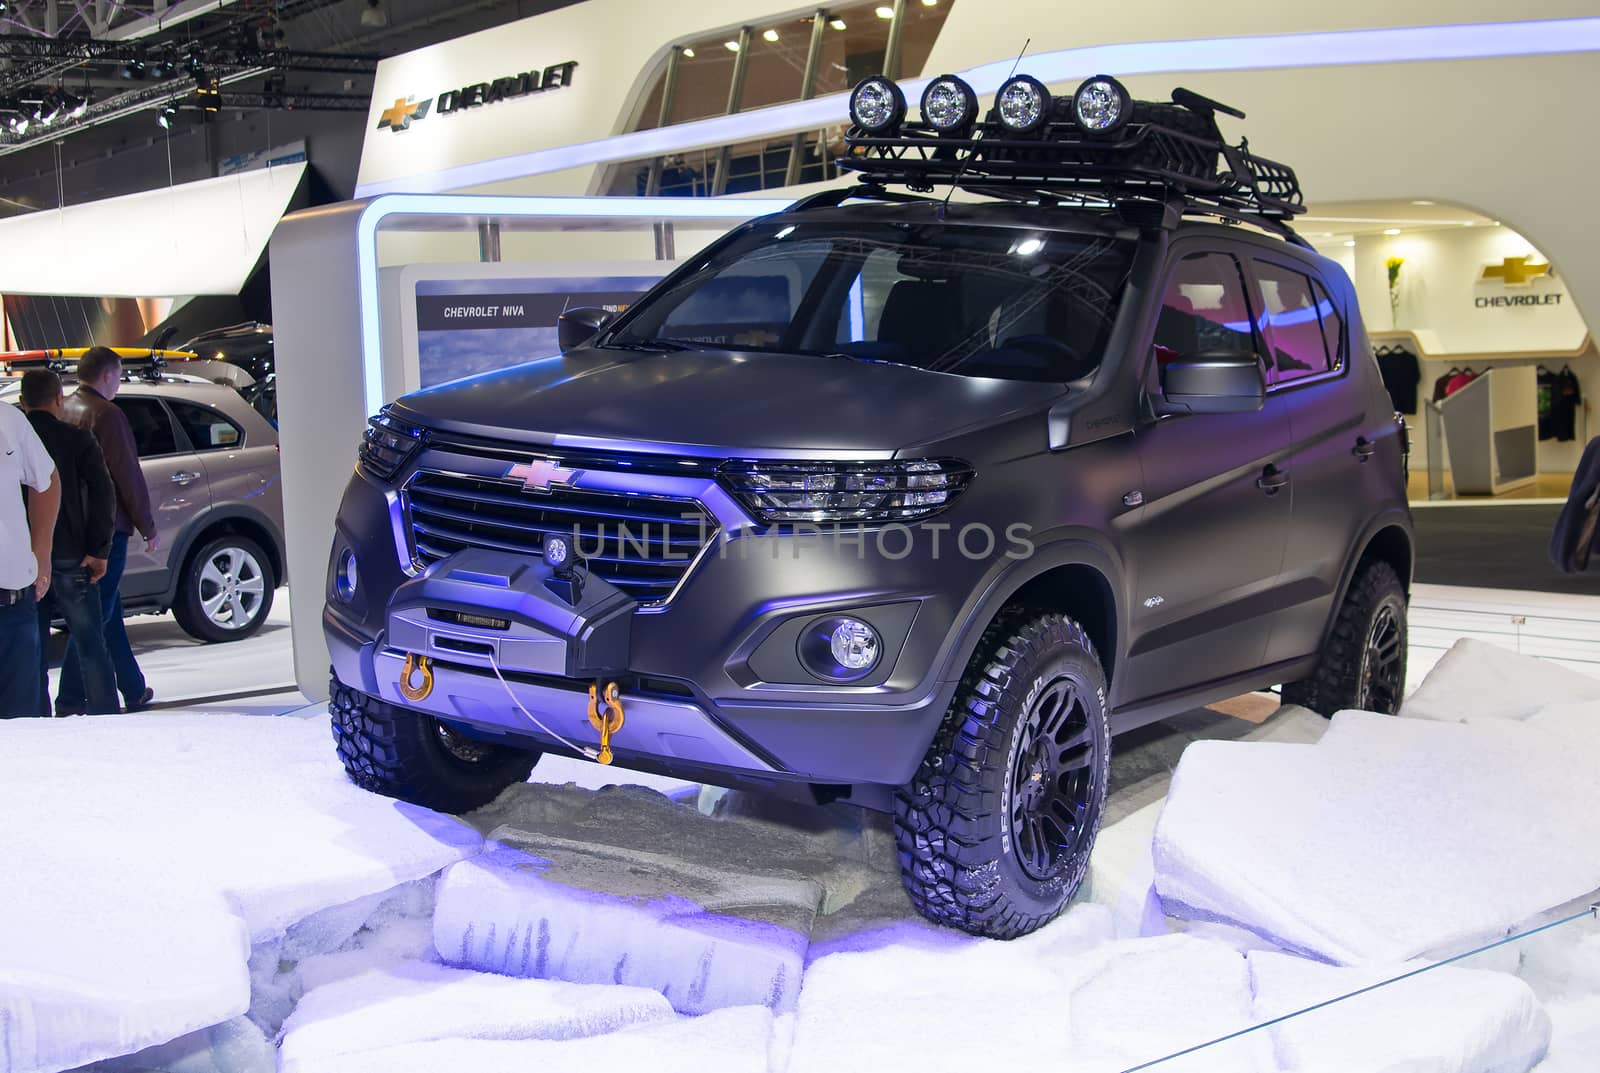 Moscow-September 2: Chevrolet Niva at the Moscow International Automobile Salon on September 2, 2014 in Moscow